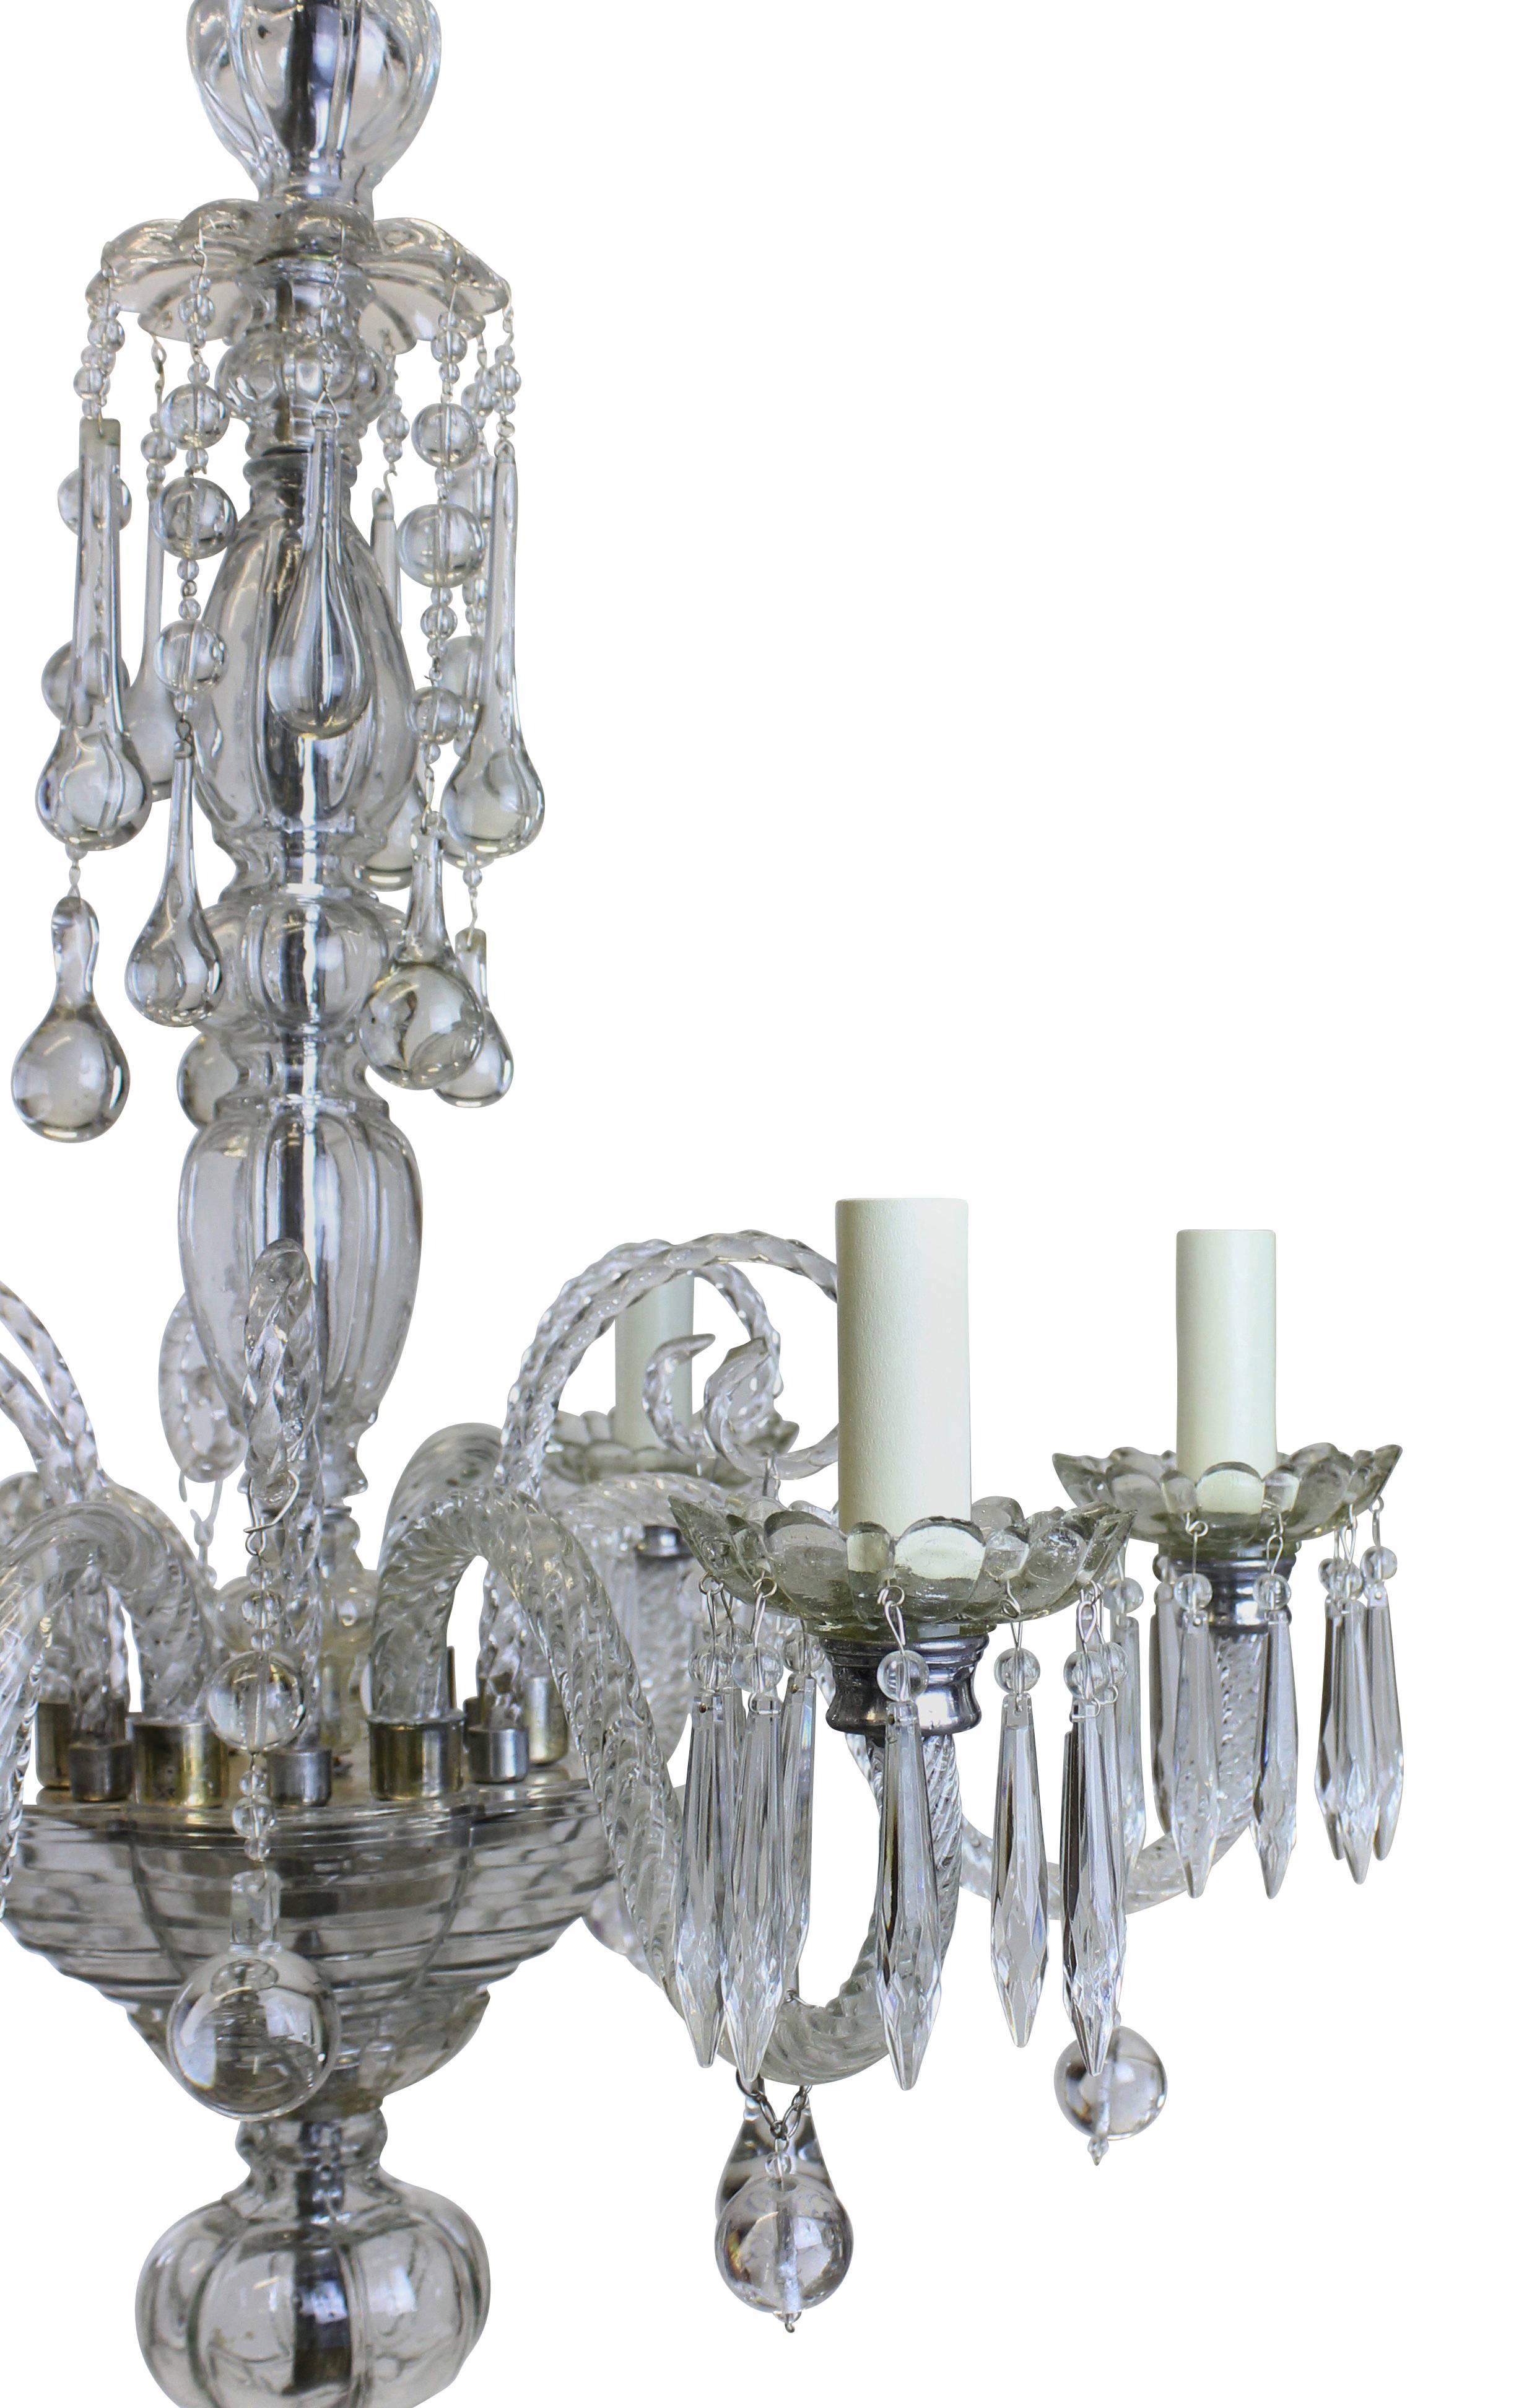 A French moulded glass traditional chandelier with swags and balls.